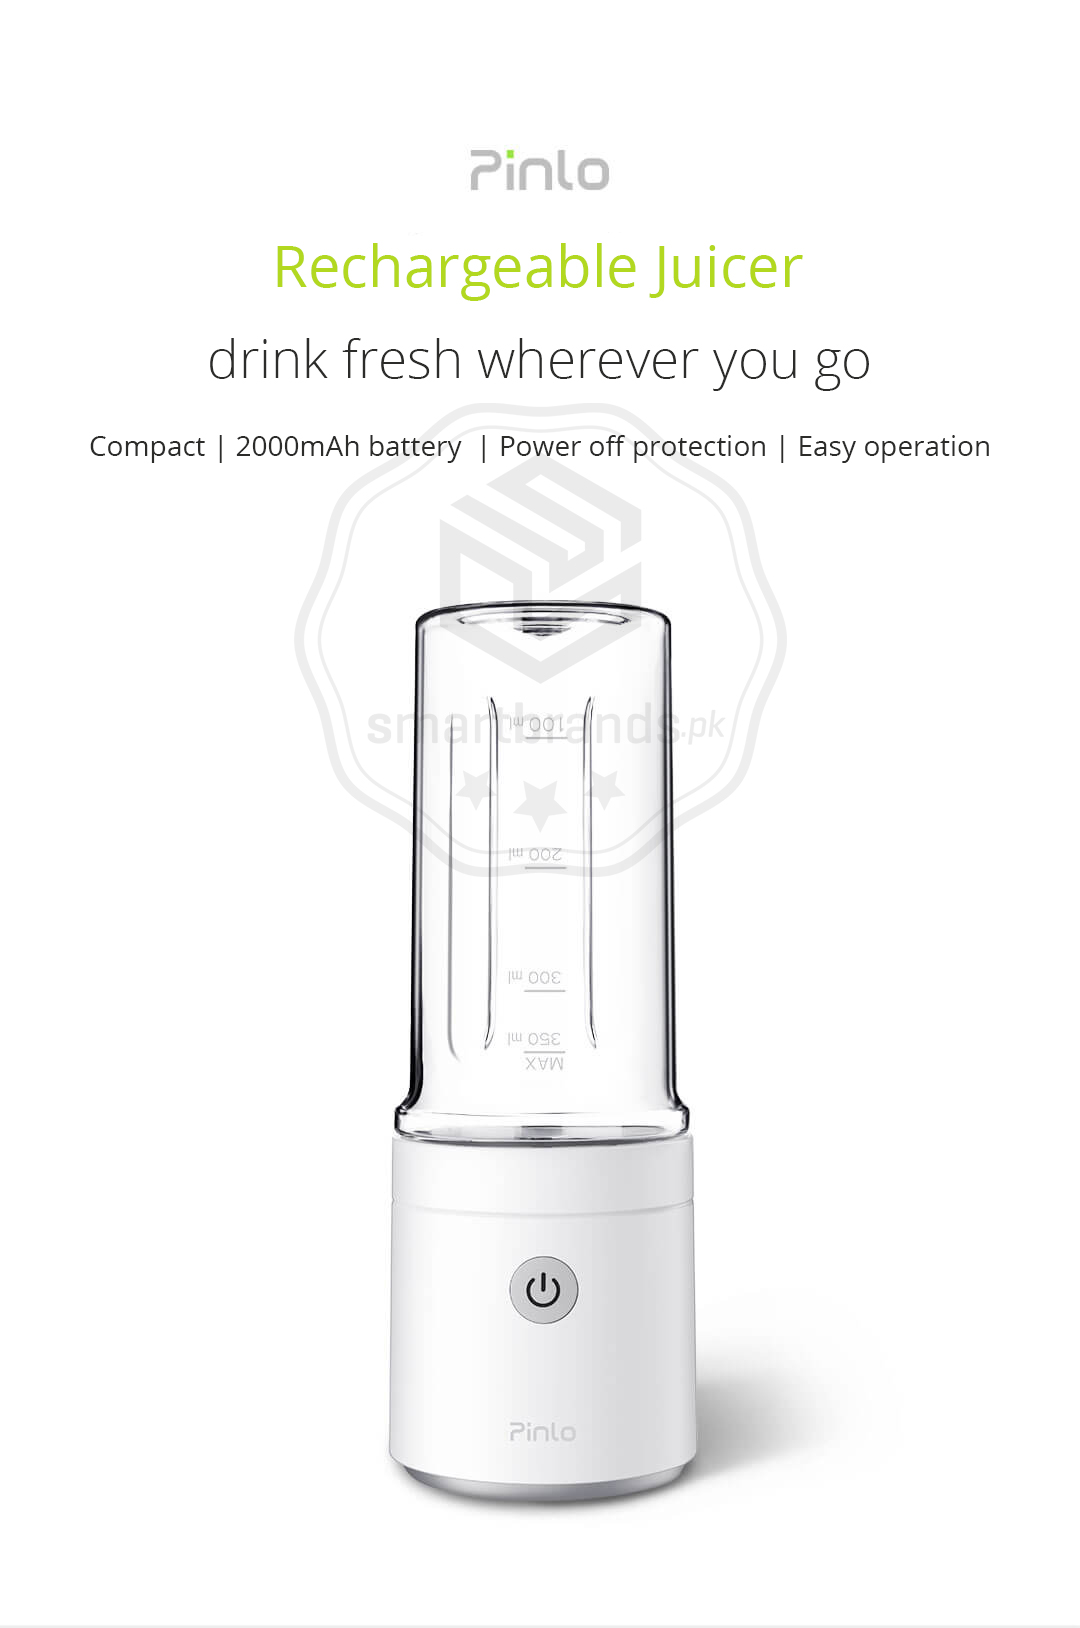 Pinlo rechargeable juicer. Rechargeable Juicer drink fresh wherever you go